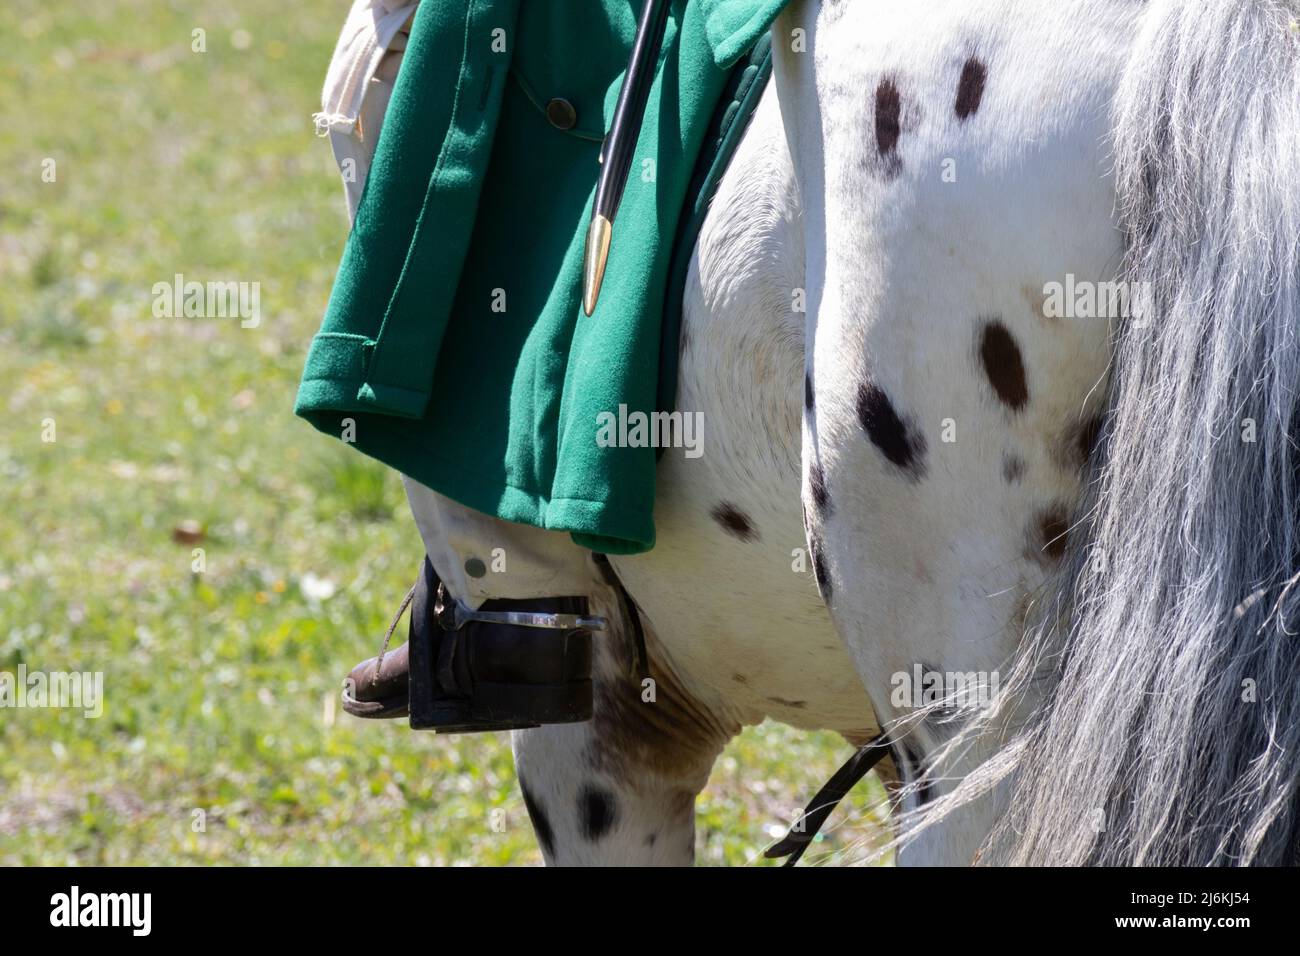 A rider on a white horse with black spots Stock Photo